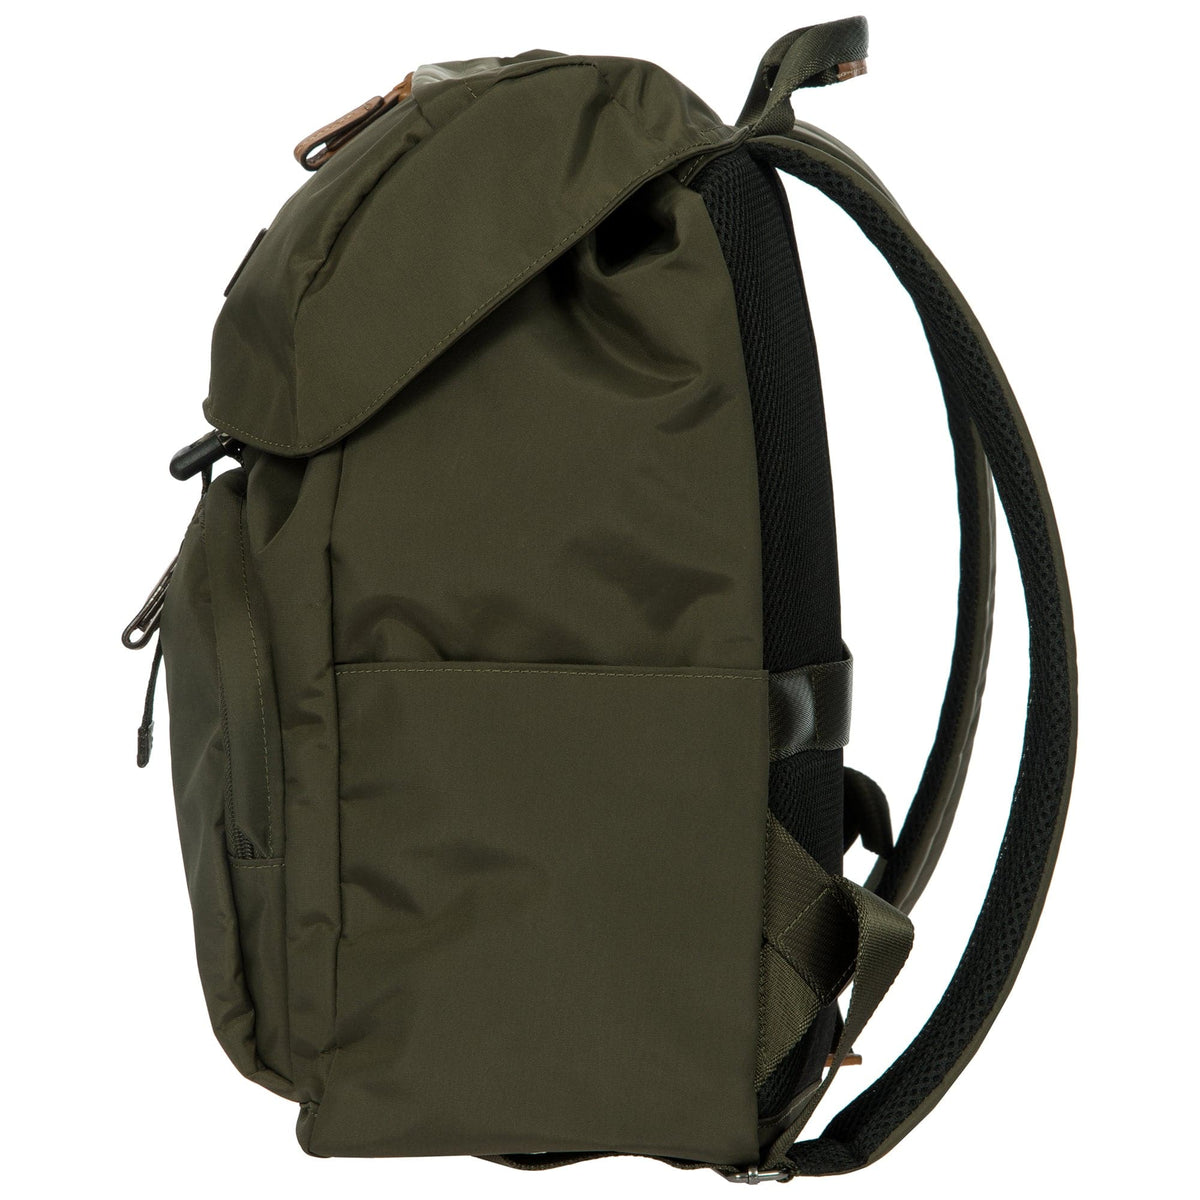 Bric's X-Bag/X-Travel Excursion Backpack